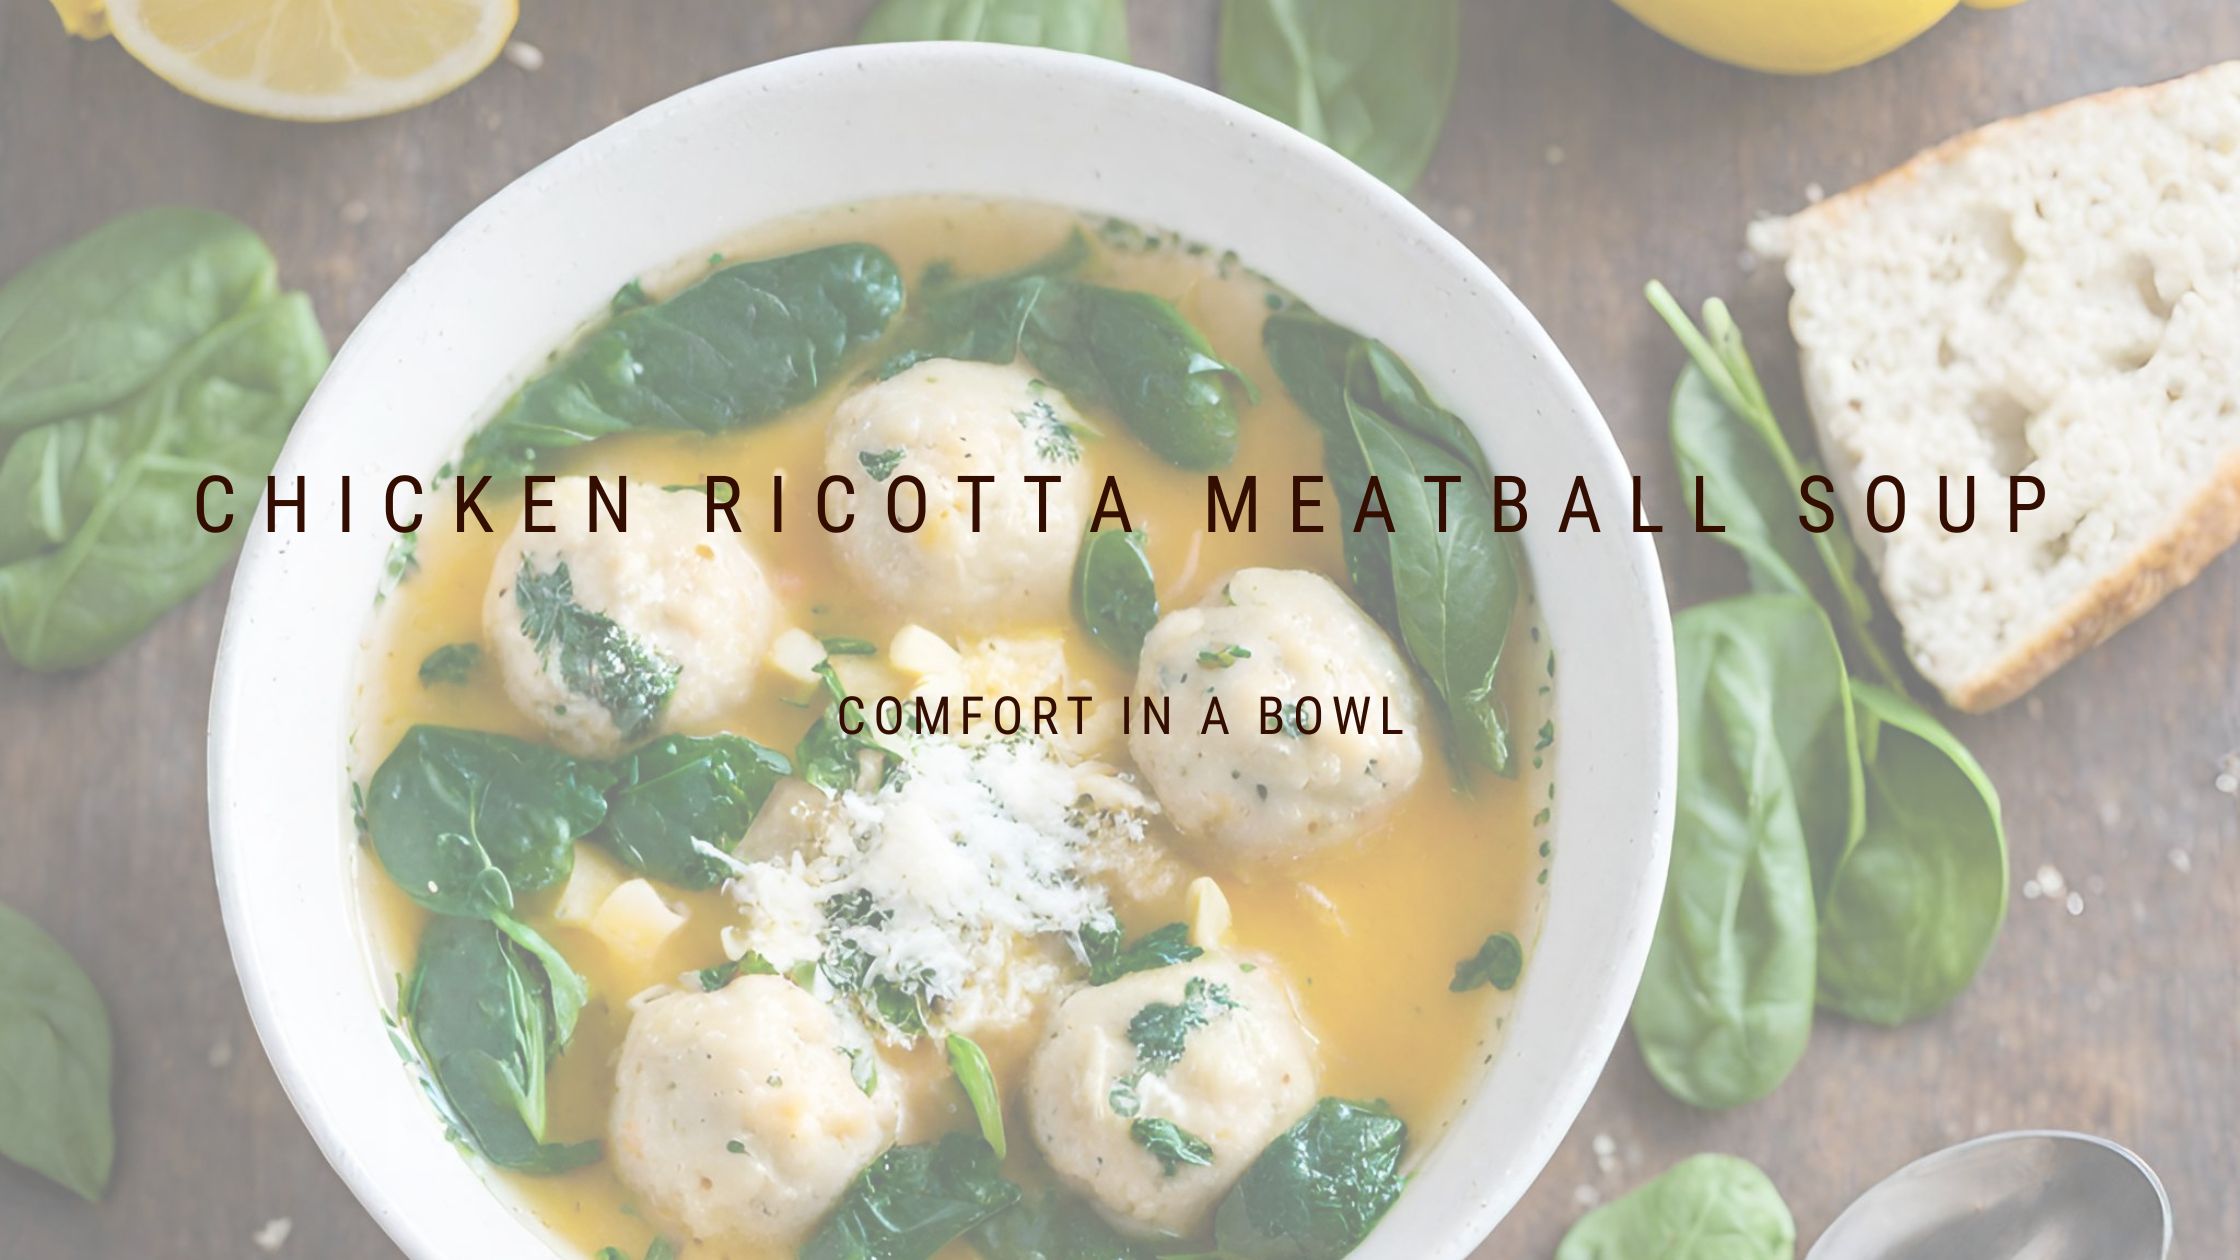 Chicken and Ricotta Meatball Soup